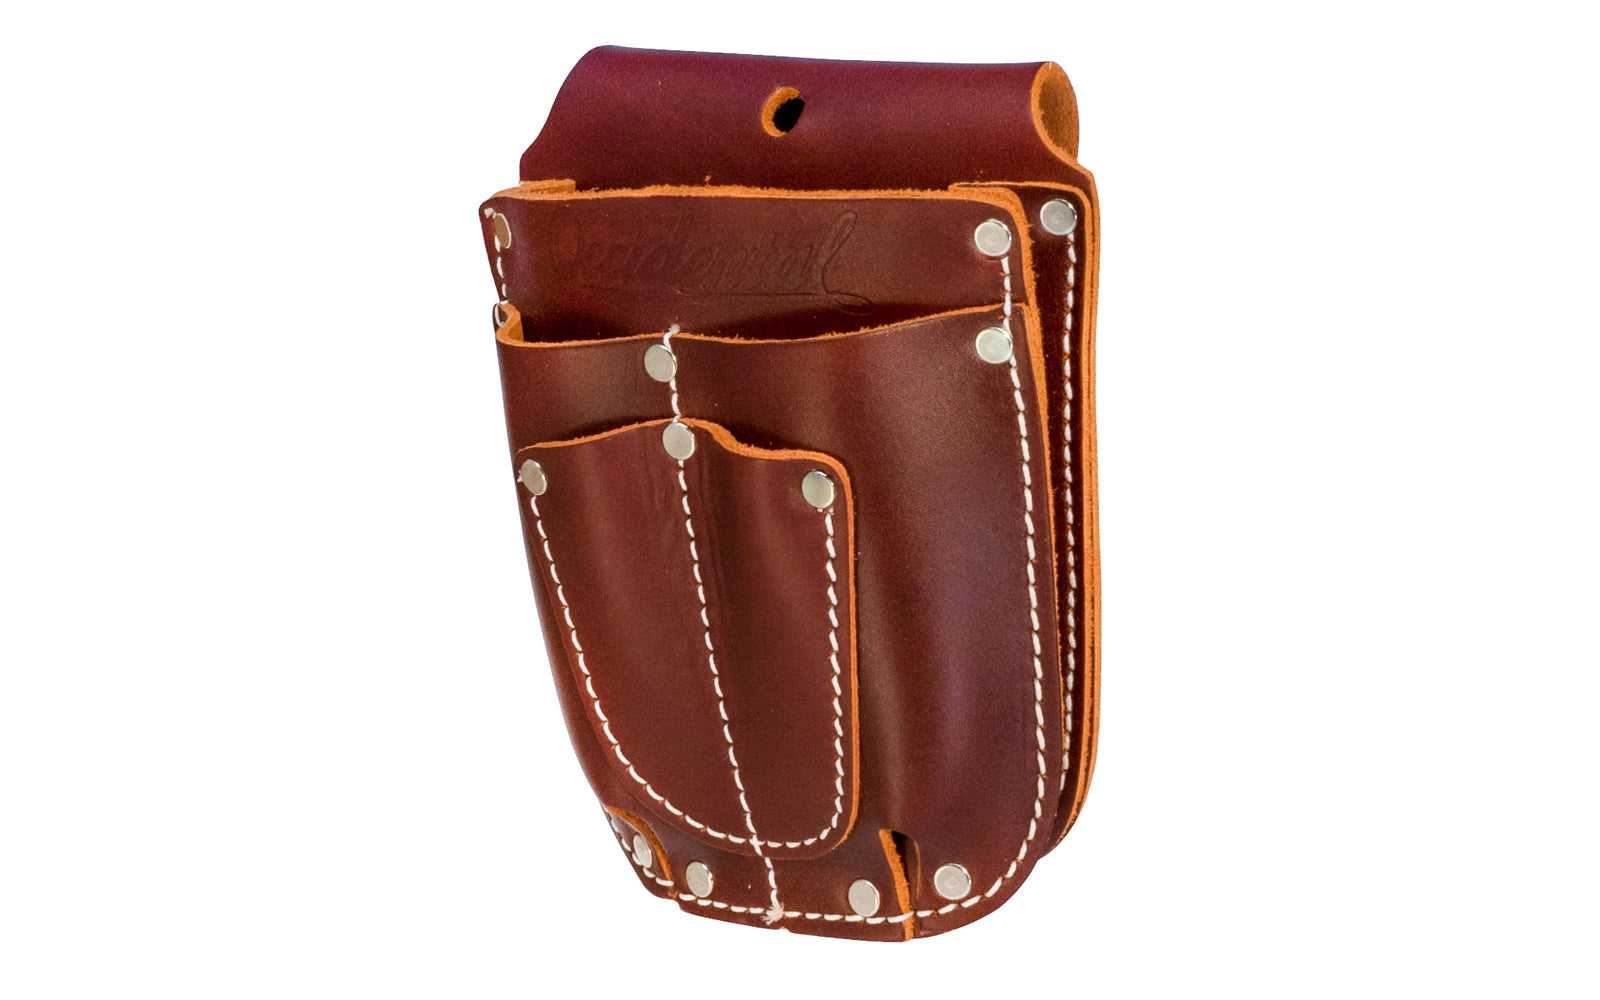 Occidental Leather 5-pocket Organizer Caddy ~ 5100 - Fits up to 2" work belt - Leather Pocket Organizer - Riveted - Holster - Belt Caddy  - Occidental Holder - Occidental Leather Pocket Caddy - Tool Caddy - 5 pocket tool organizer Ideal for small repair work, shop workers, gardeners, farm repair, & cabinetmakers - Five Pocket Caddy